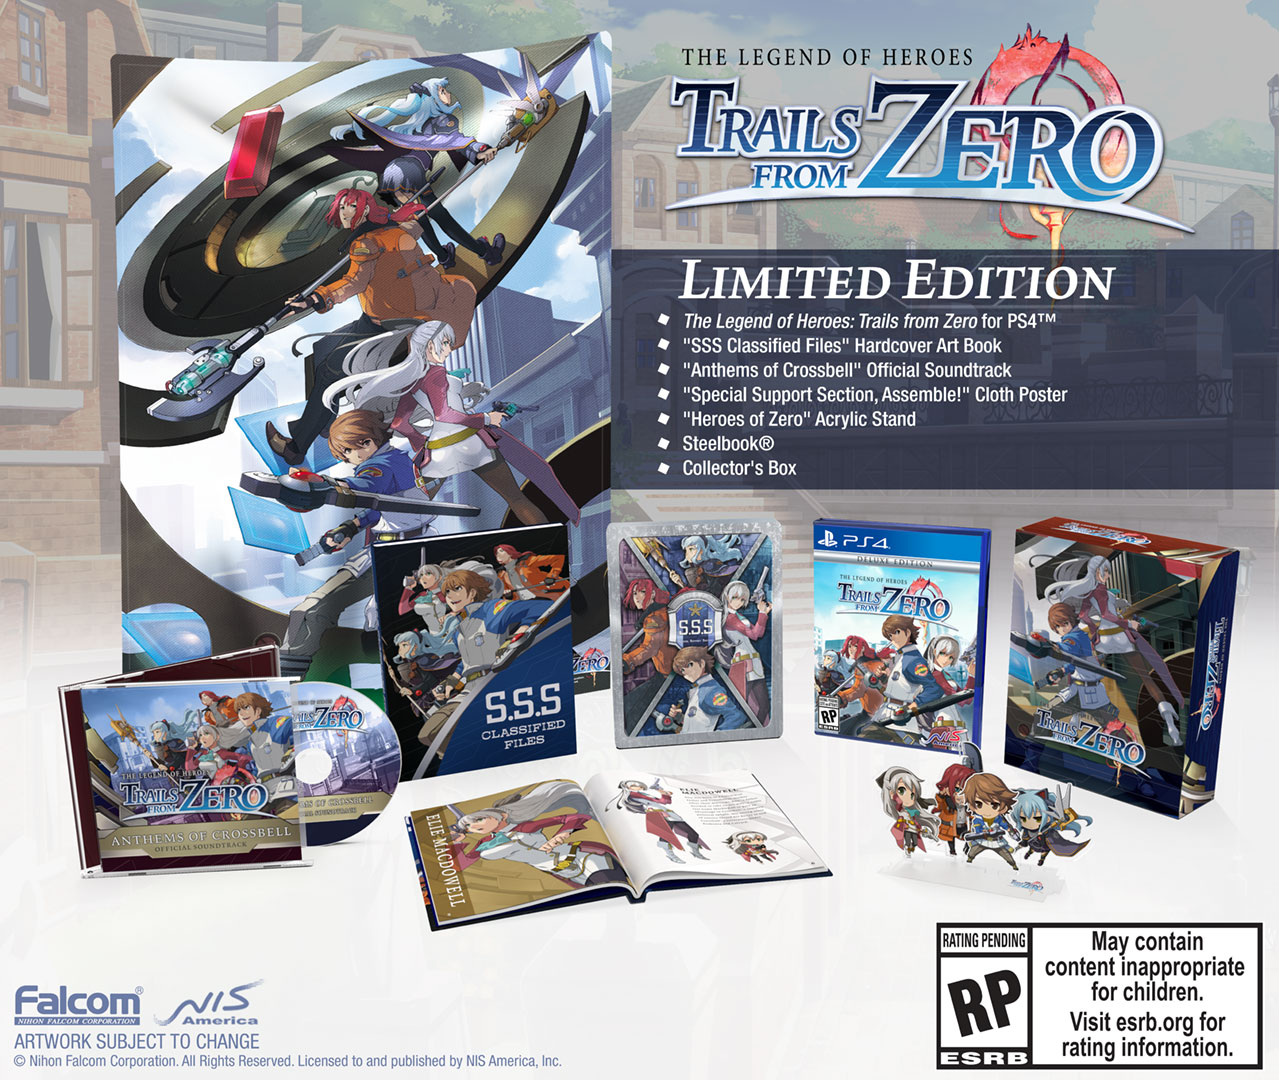 The Legend of Heroes: Trails from Zero Limited Edition Announced